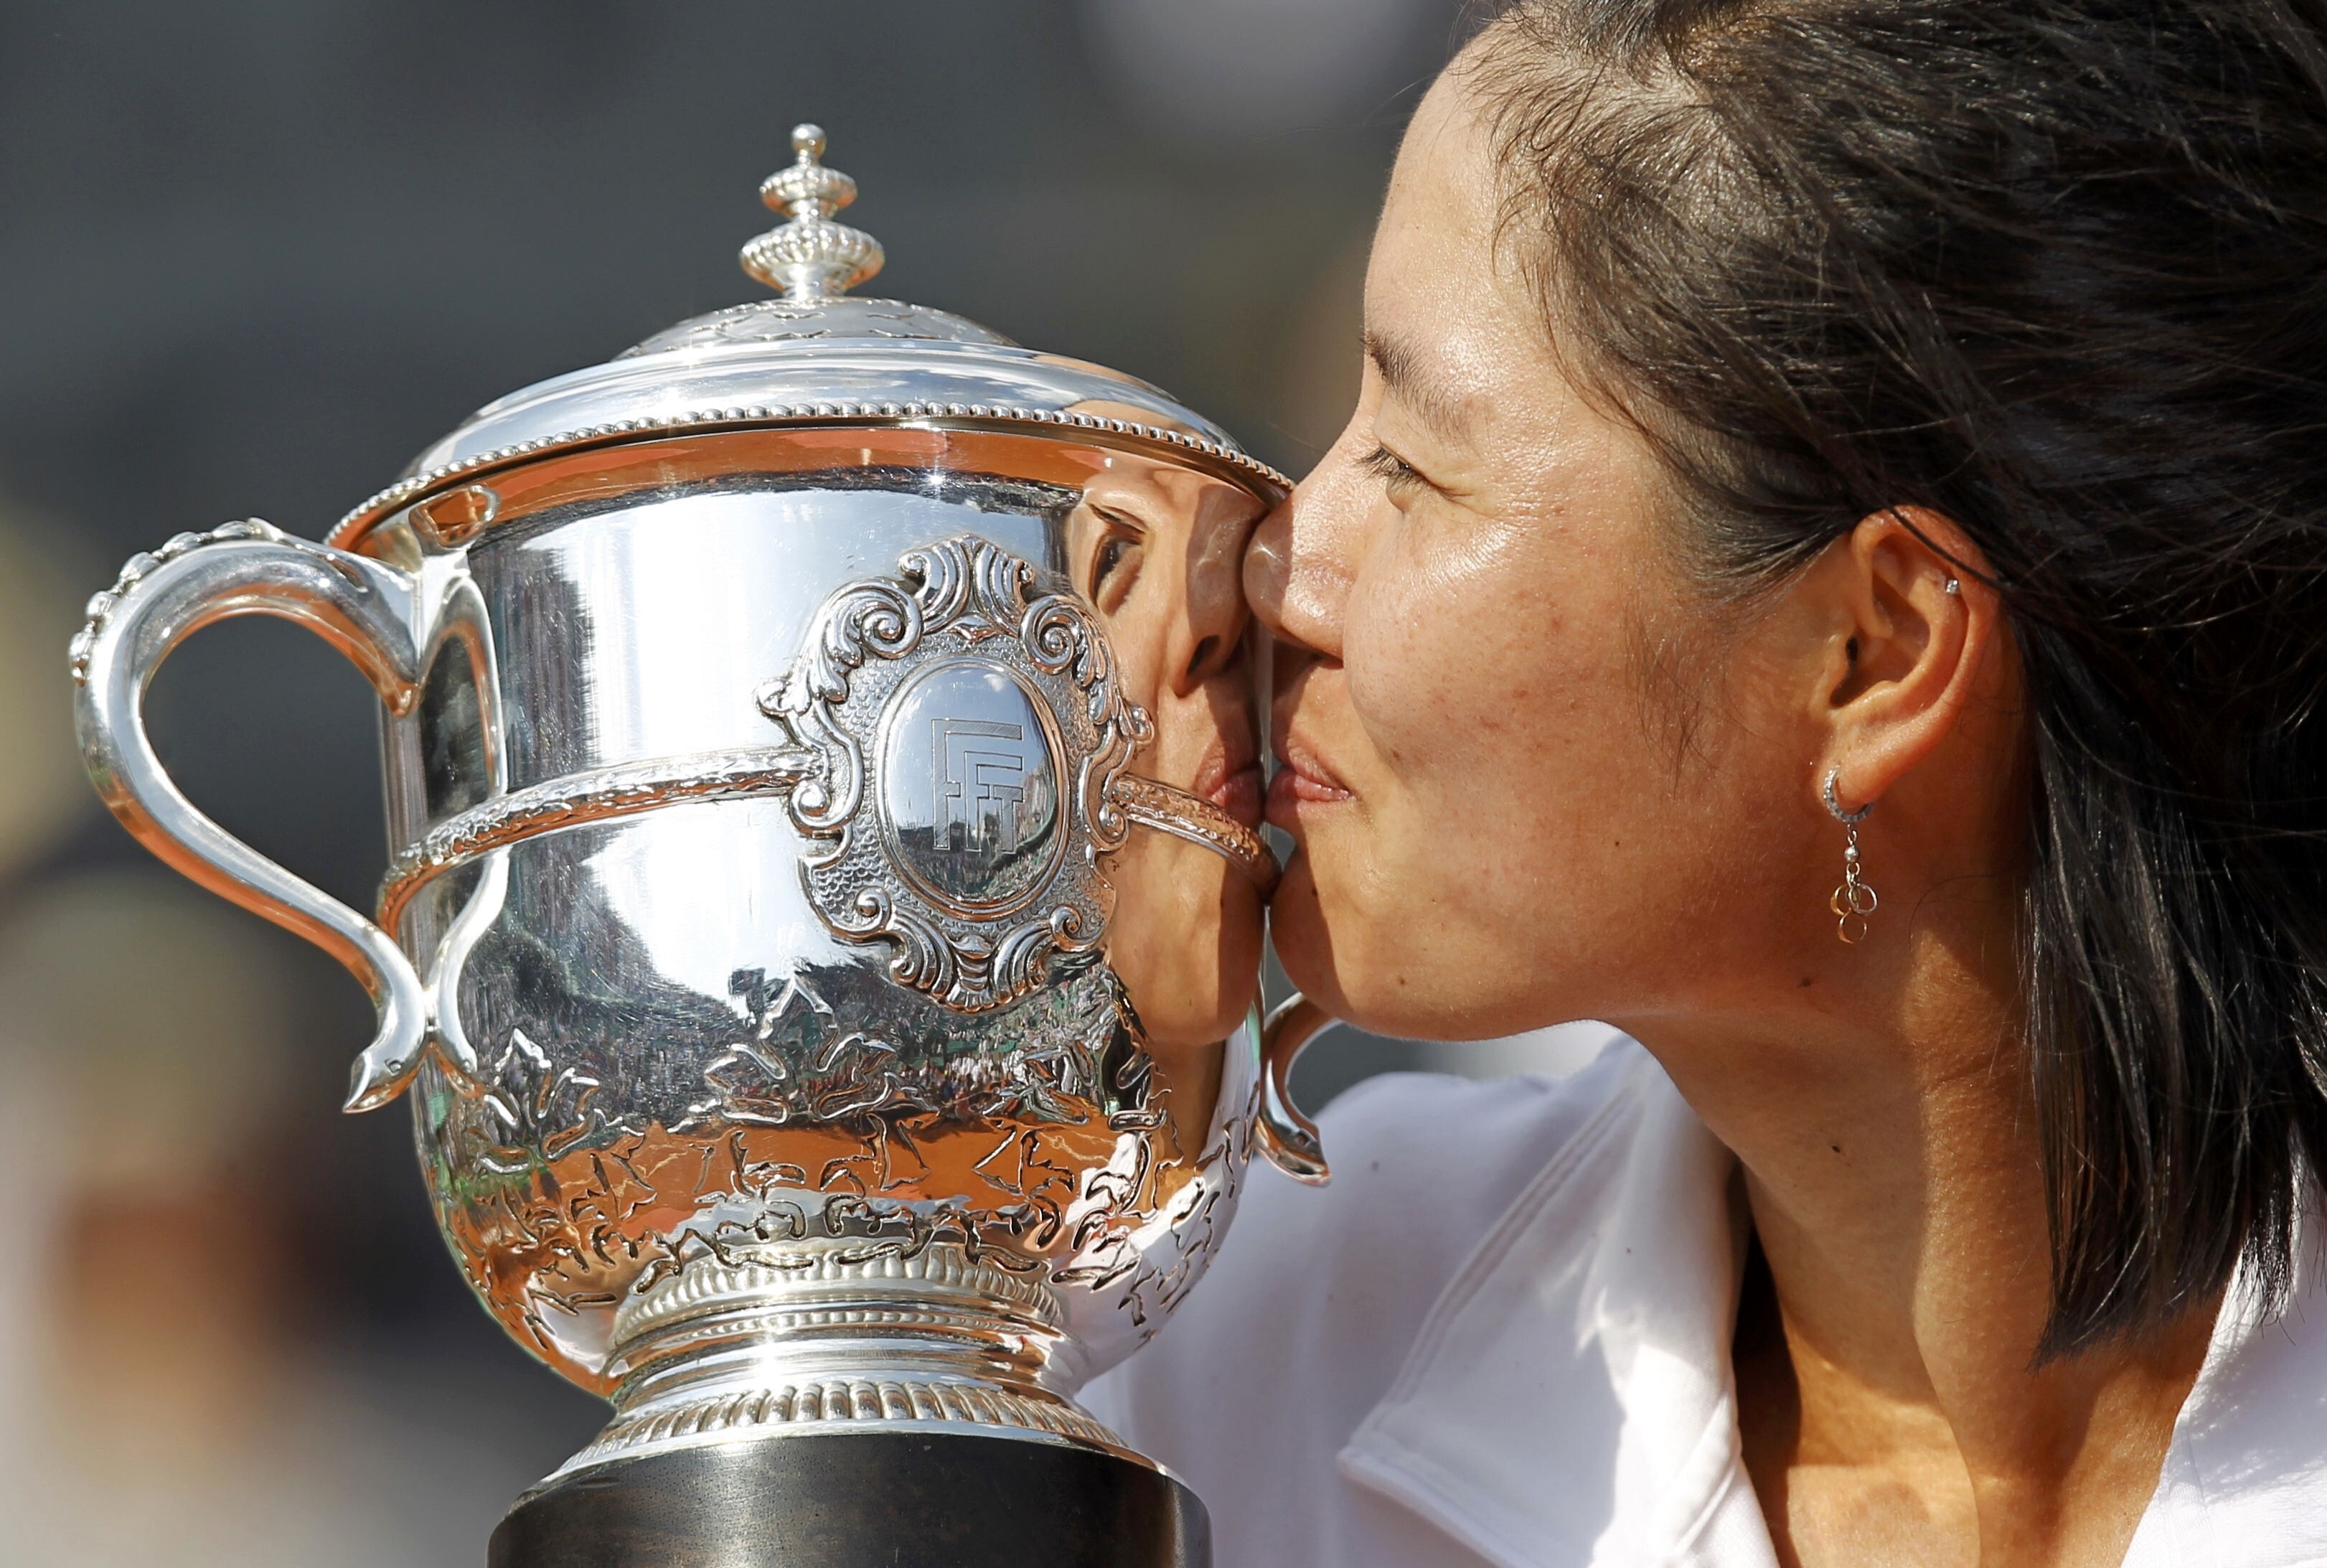 Li Na of China kisses the trophy after winning her women's final against Francesca Schiavone of Italy at the French Open tennis tournament at the Roland Garros stadium in Paris on June 4, 2011. Photo: Reuters